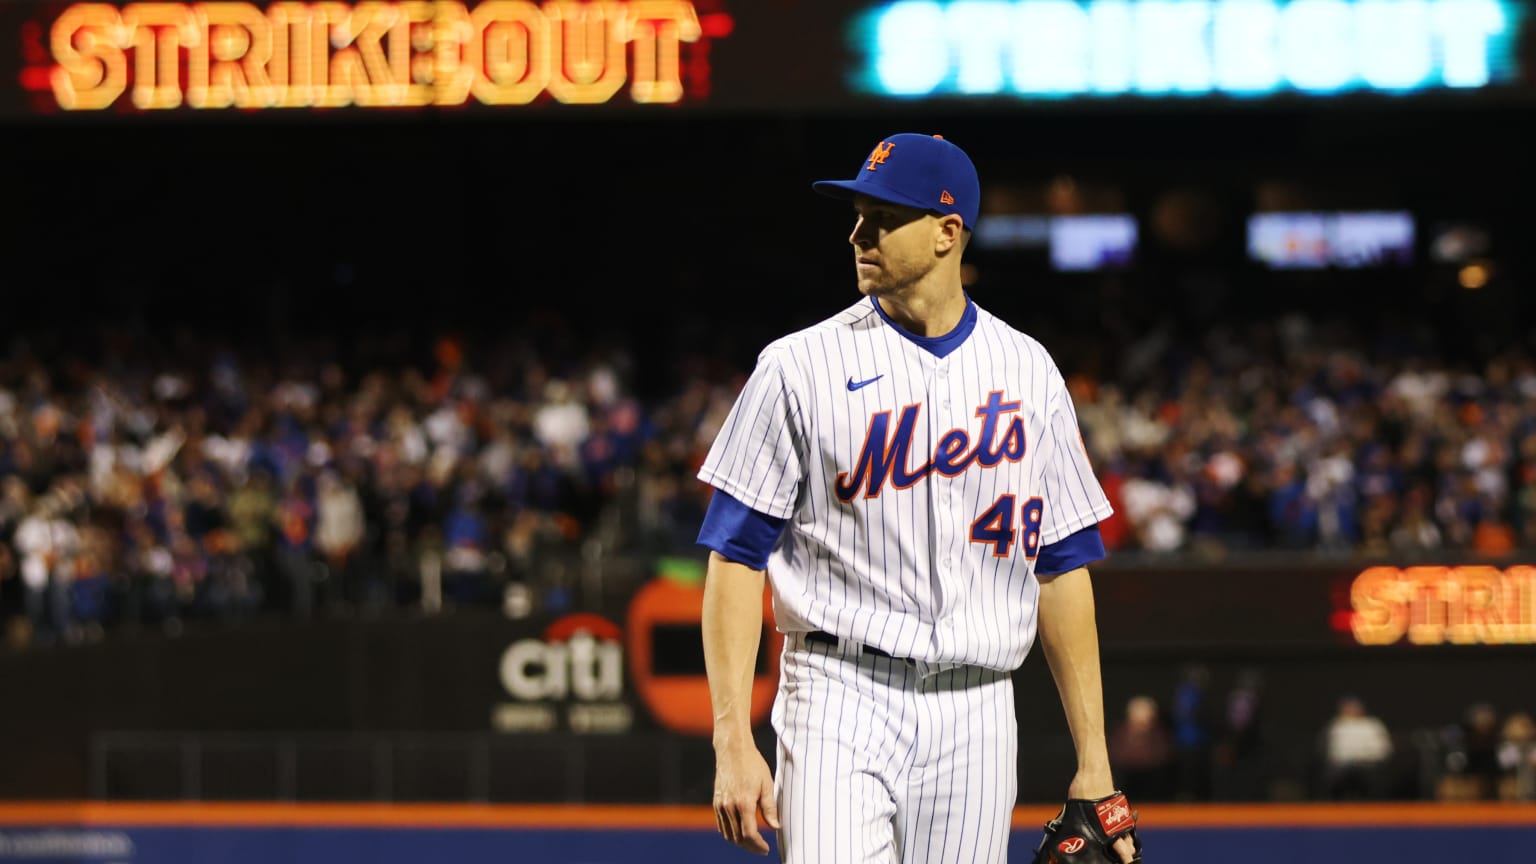 Jacob deGrom looks toward the dugout after a strikeout